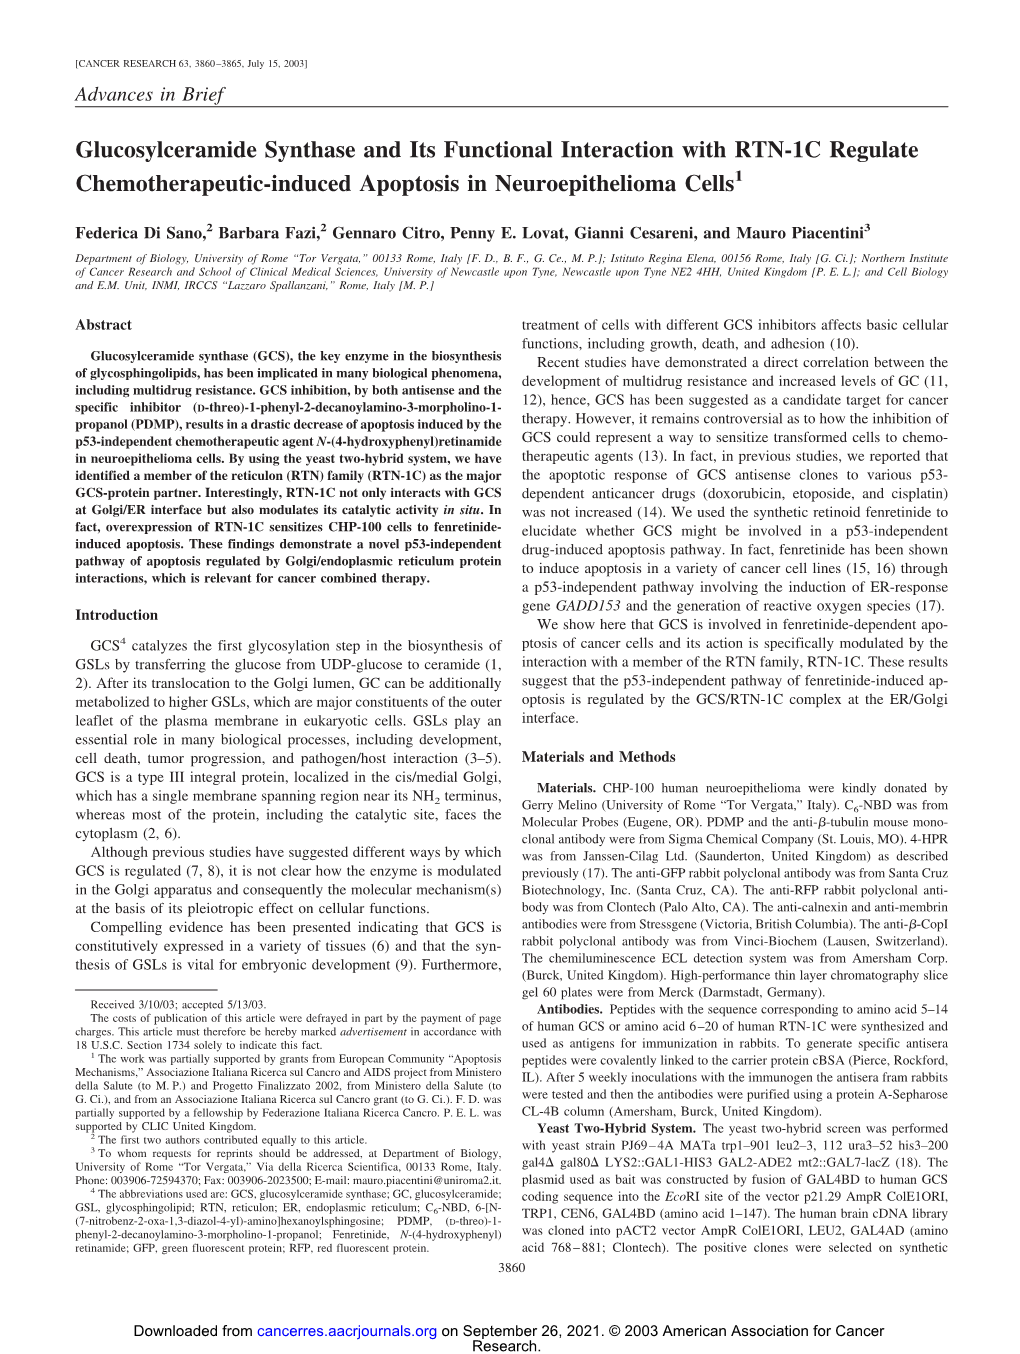 Glucosylceramide Synthase and Its Functional Interaction with RTN-1C Regulate Chemotherapeutic-Induced Apoptosis in Neuroepithelioma Cells1